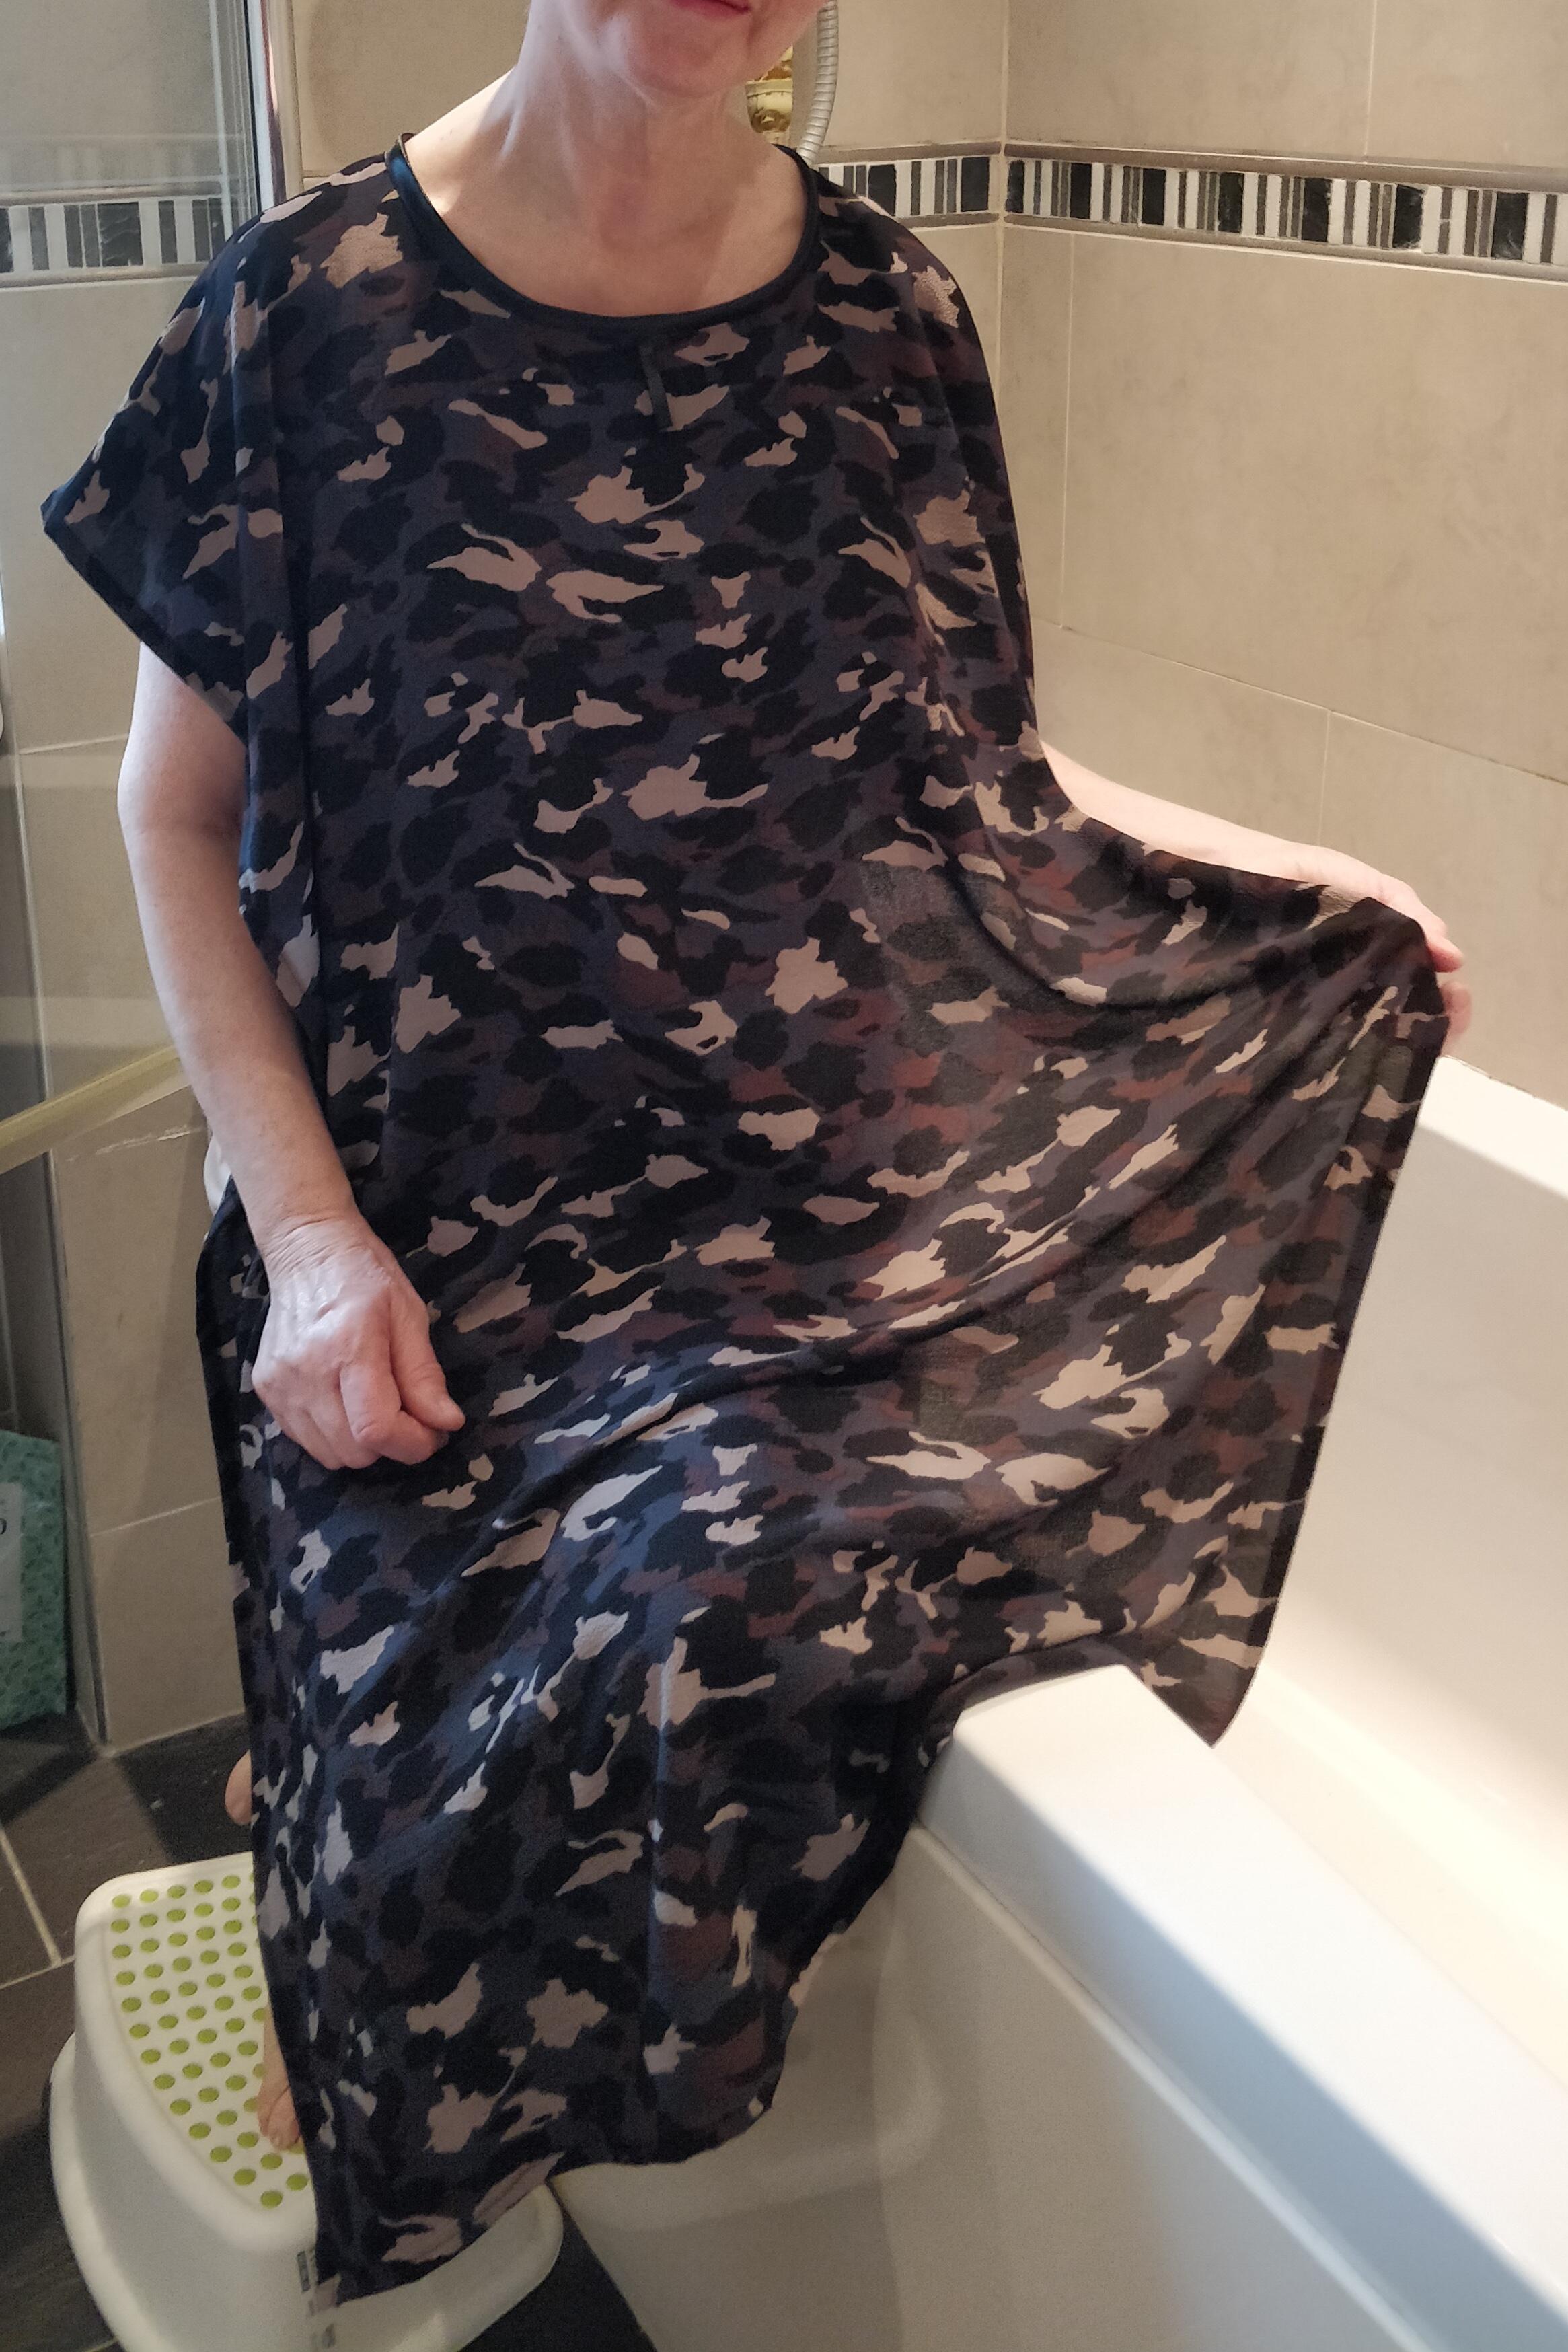 Dark Camouflage design NeverNaked(tm) Shower Drapron® to provide modesty, dignity and privacy whilst being helped to shower or bathe. Shower modesty wear. Bathing modesty gown. Lightweight crepe. Slips over shoulders - No sleeves Magnetic fastening at back